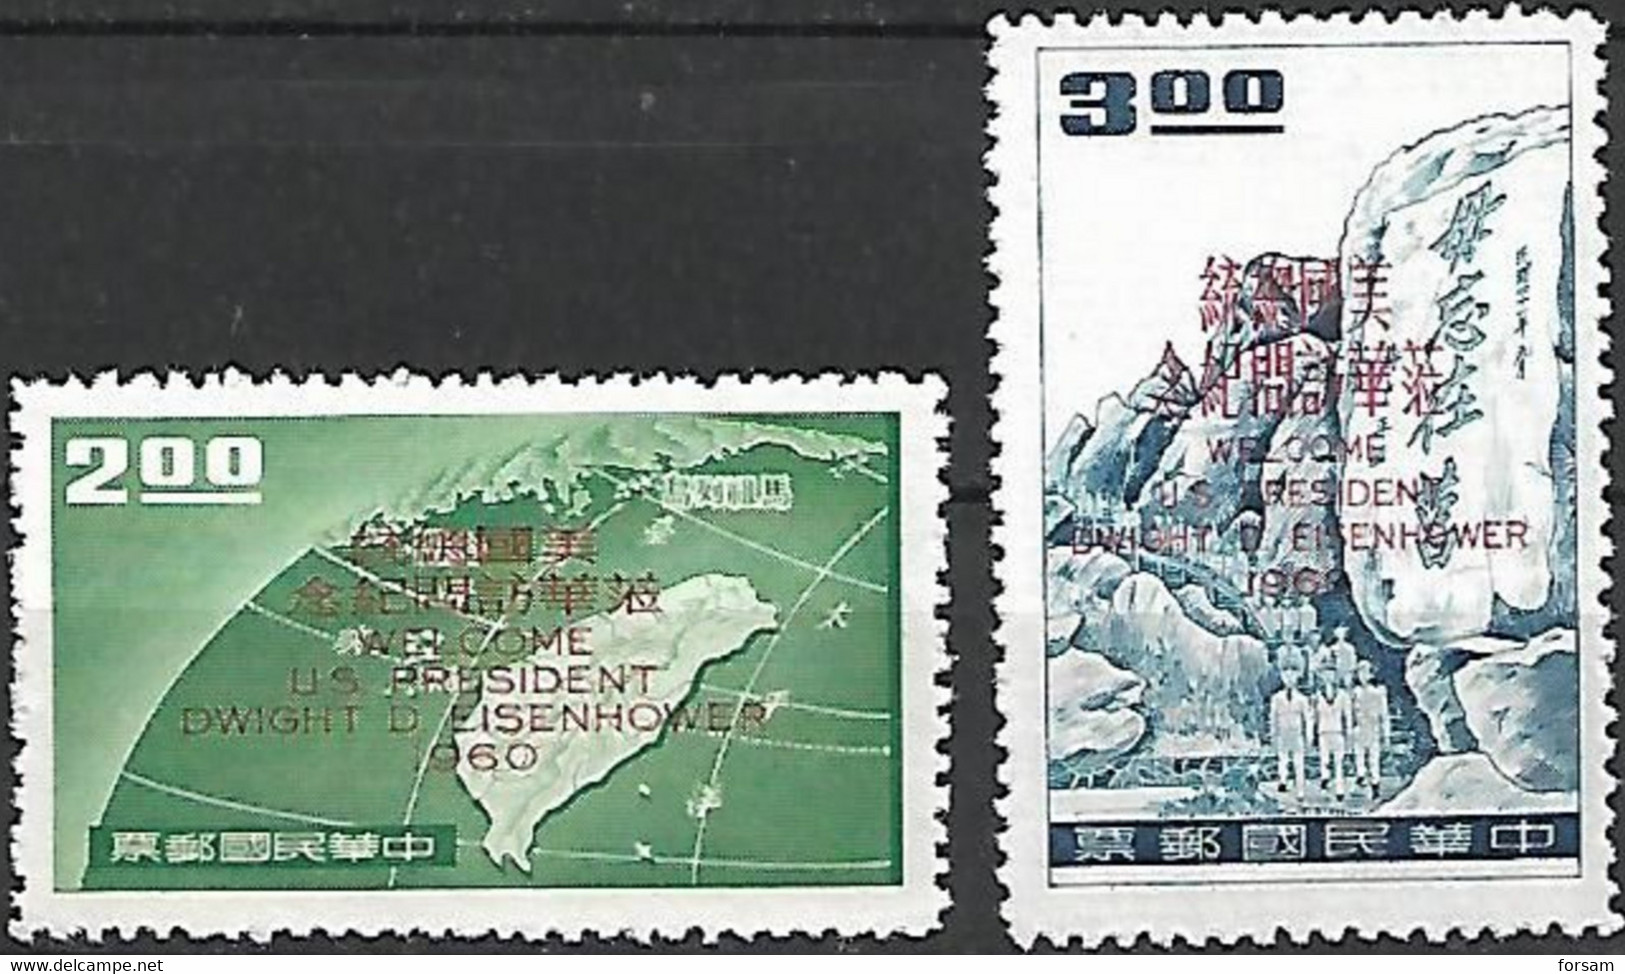 TAIWAN (FORMOSA)..1960..Michel # 363-364...MLH. - Unused Stamps